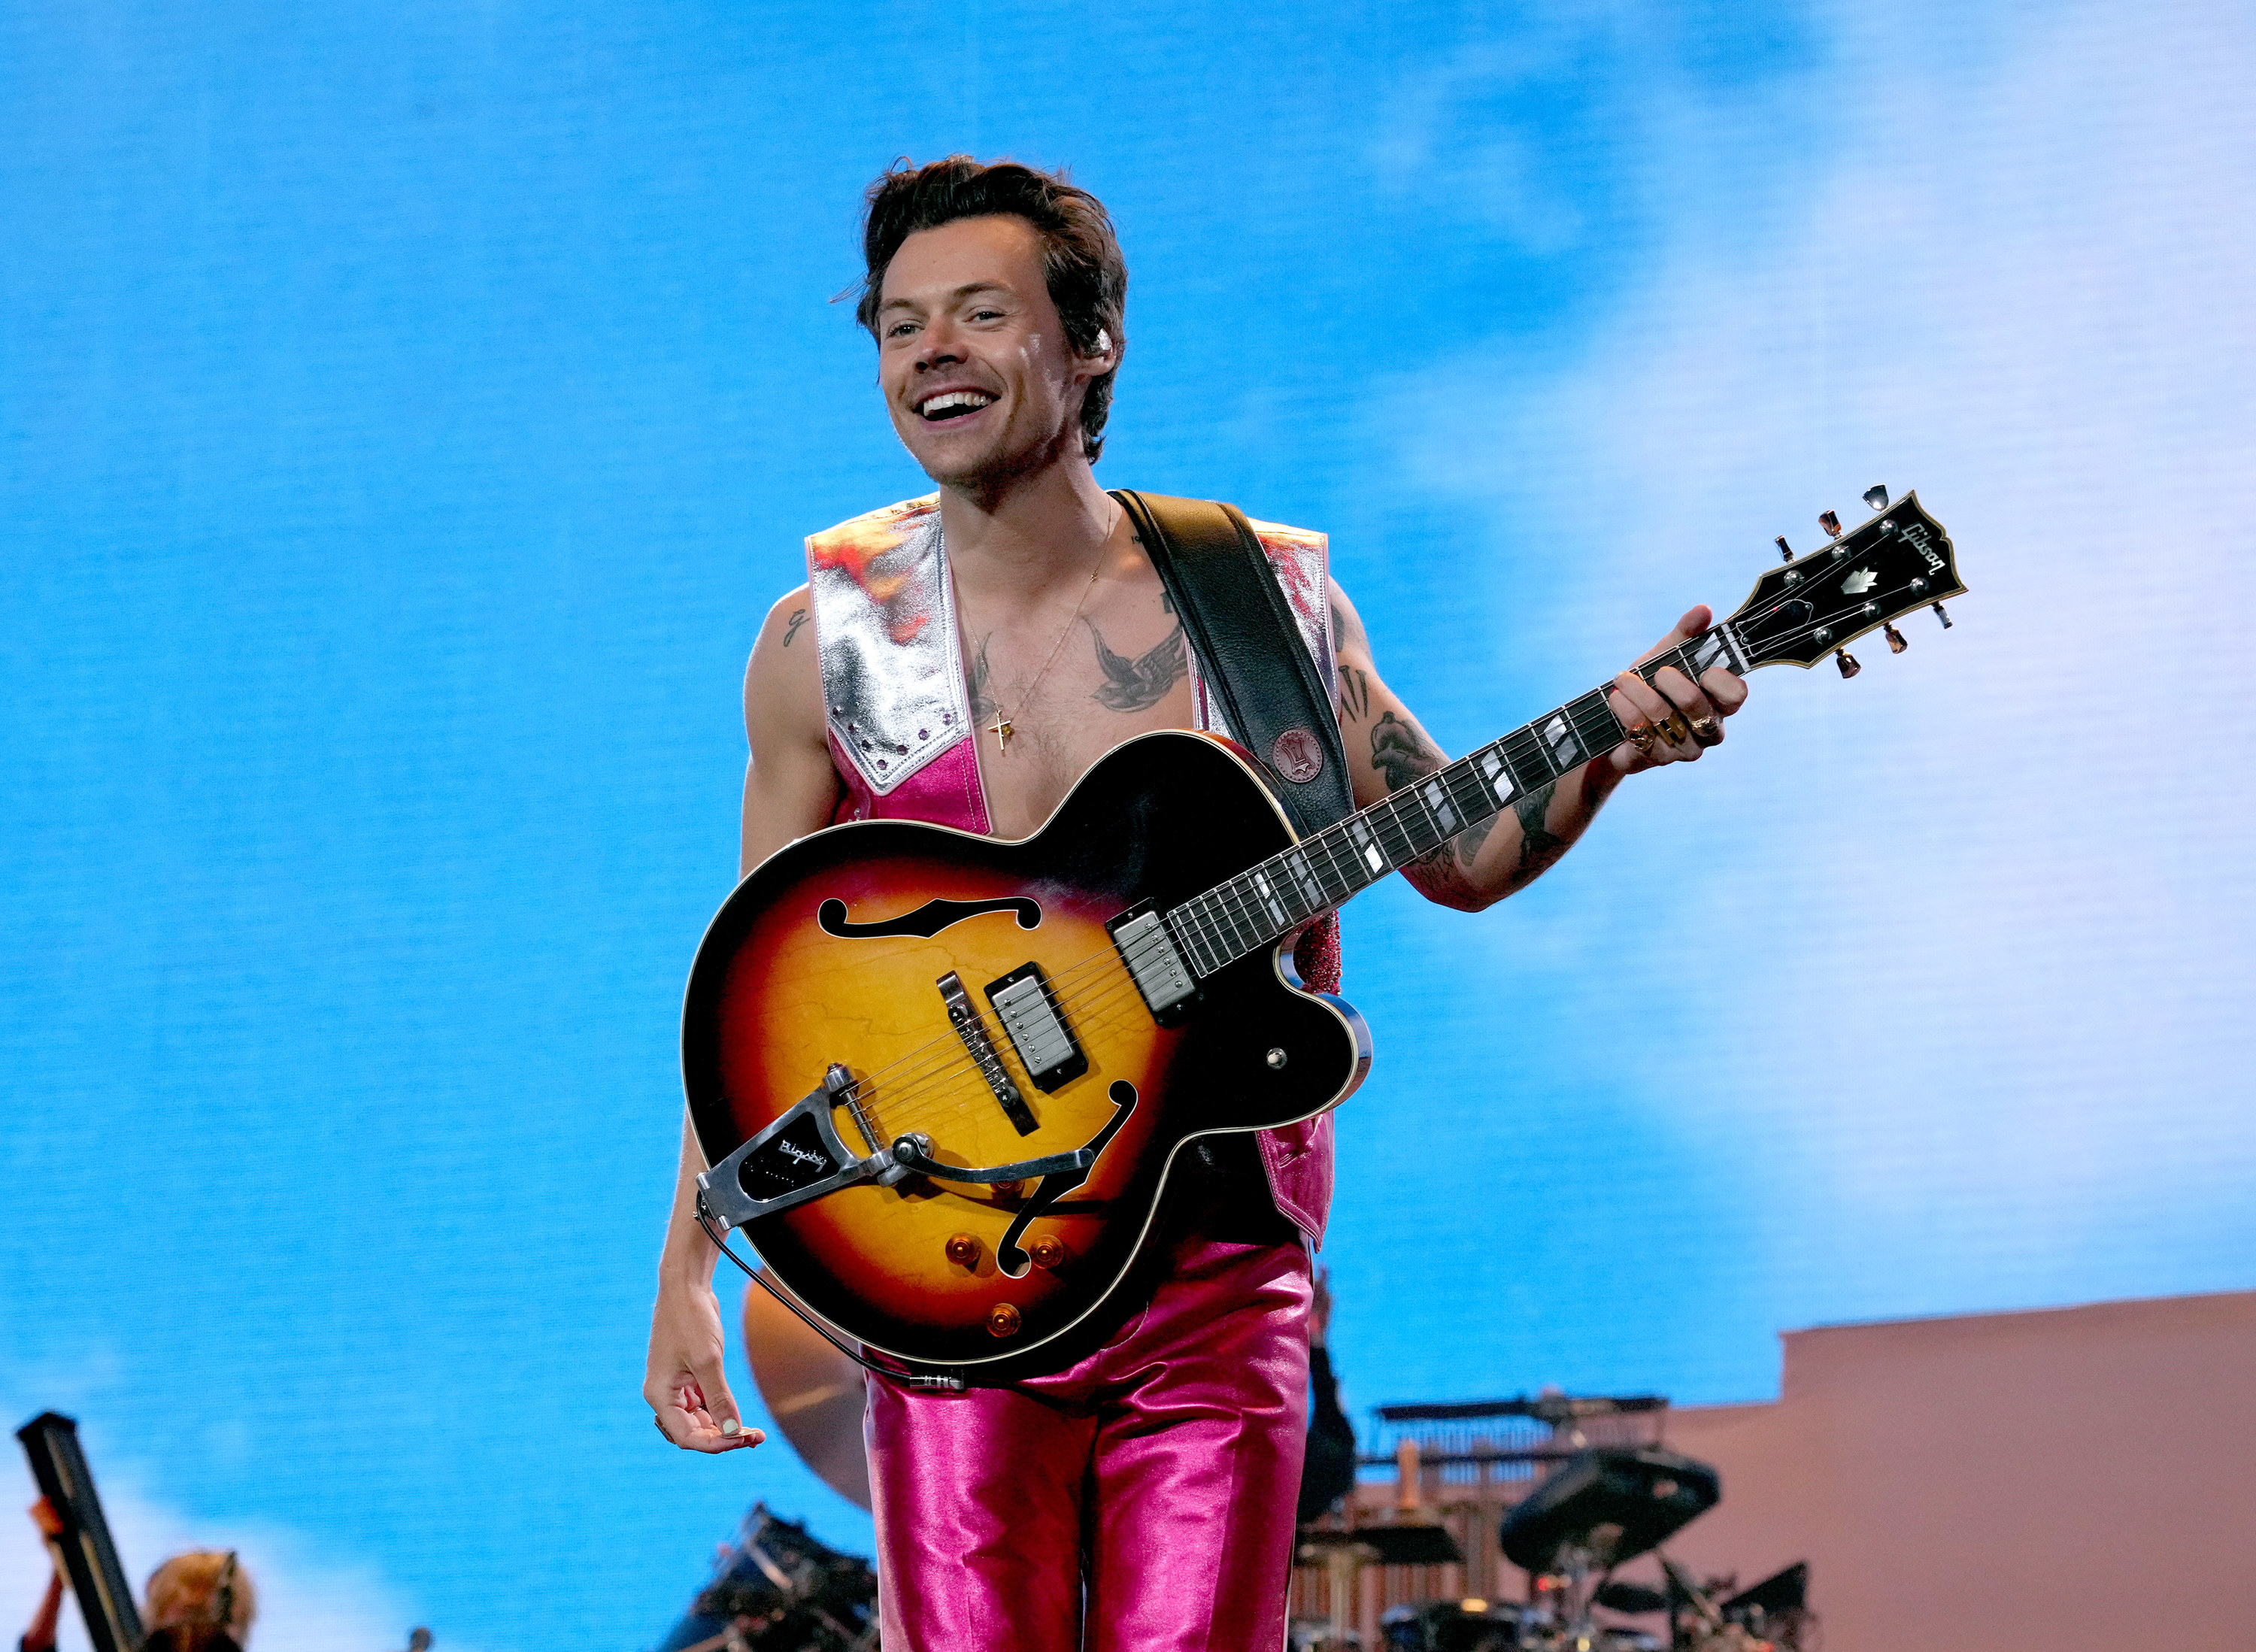 Harry Styles performing onstage with a guitar